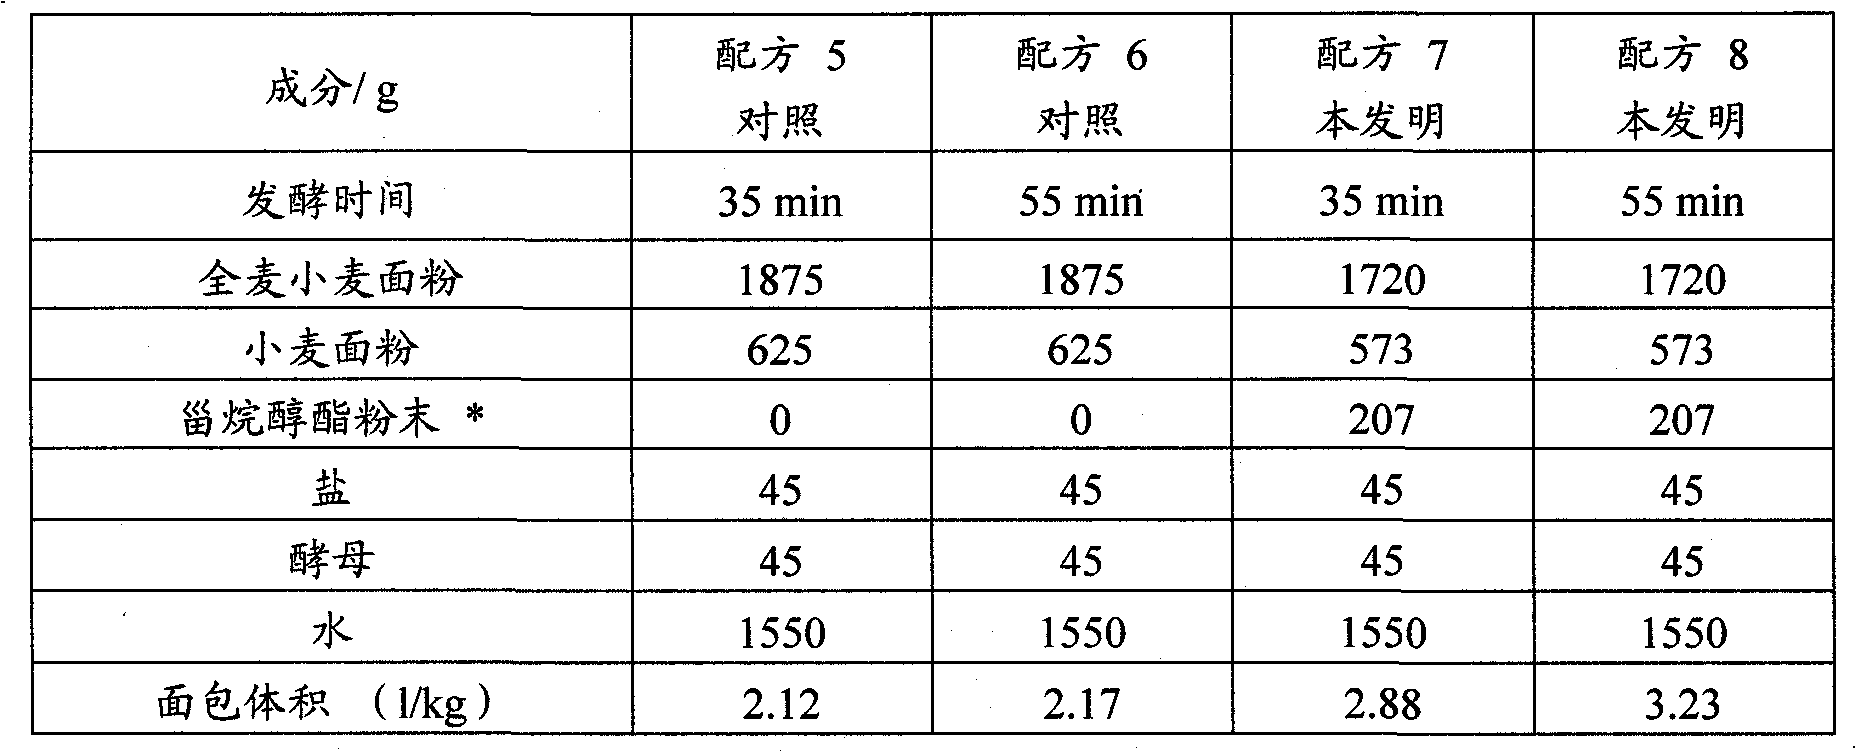 Bread composition with improved bread volume